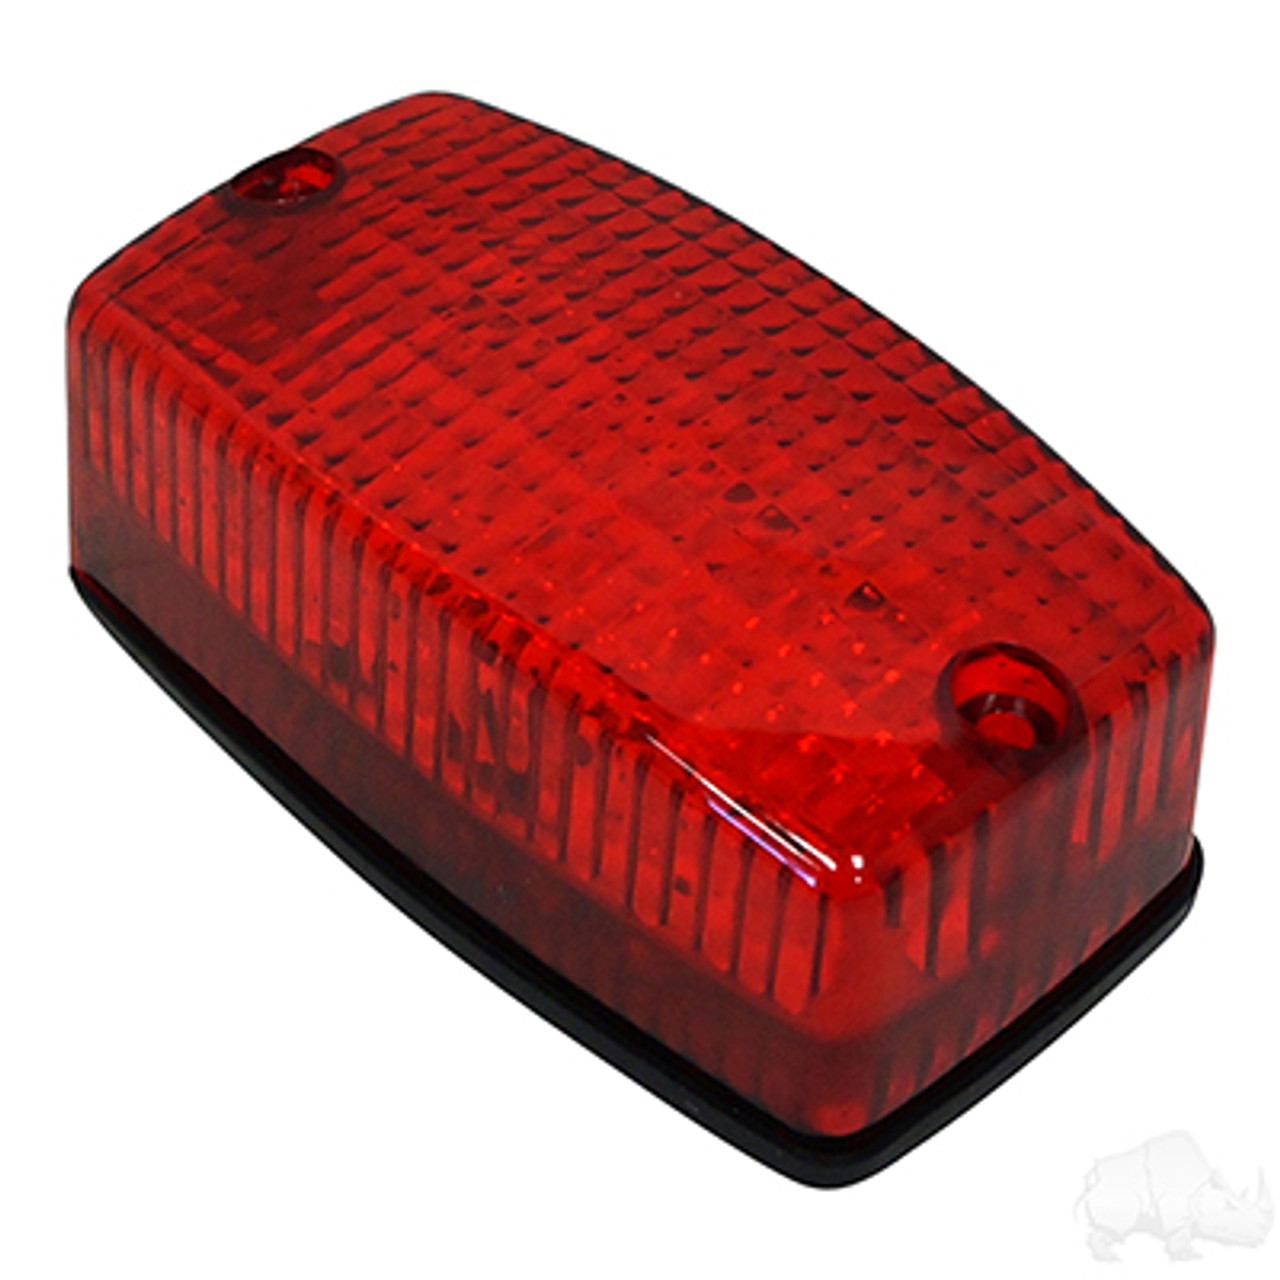 LED Taillight Assembly (Universal Golf Cart Fit), LGT-117, LGT-111, 22260G2, 22288G1, 22288G2, 610416, 2412, 20425 WIRING DETAILS: Red: Positive/Power White: Ground Black: Turn signal Runs off 12V